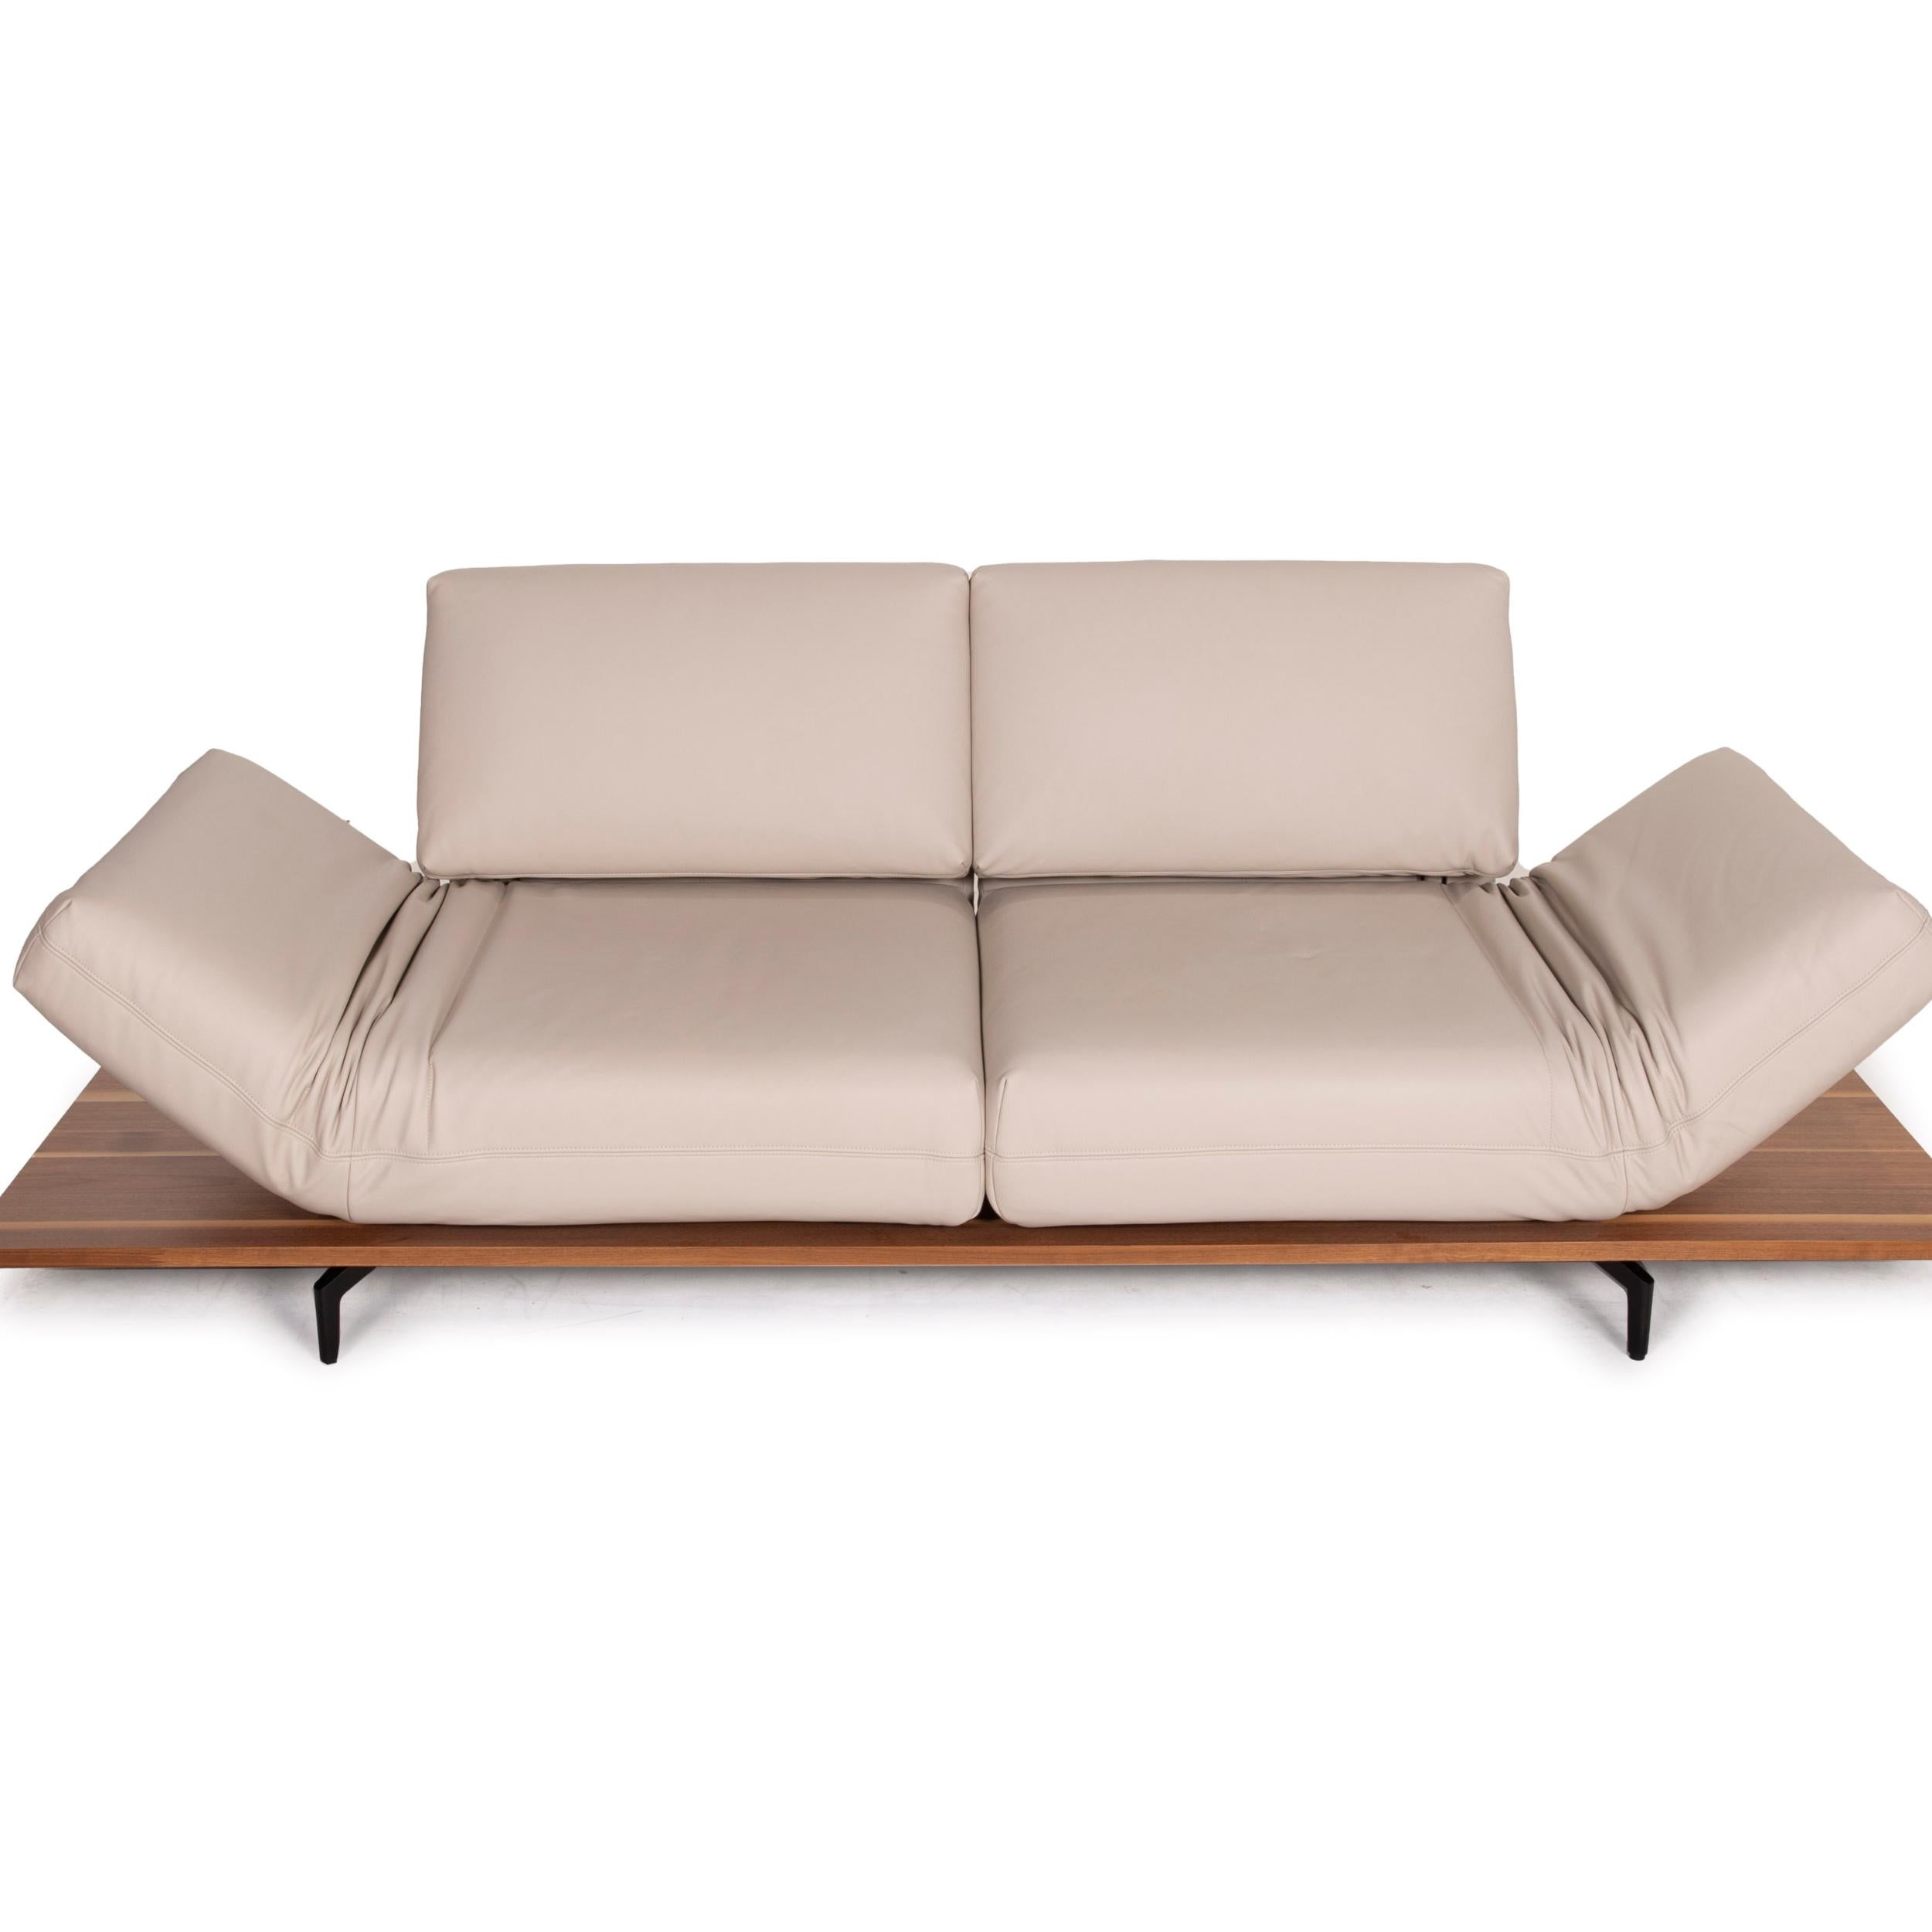 Rolf Benz Aura Leather Sofa Cream Two-Seater Function, Reclining Function, Wood 3